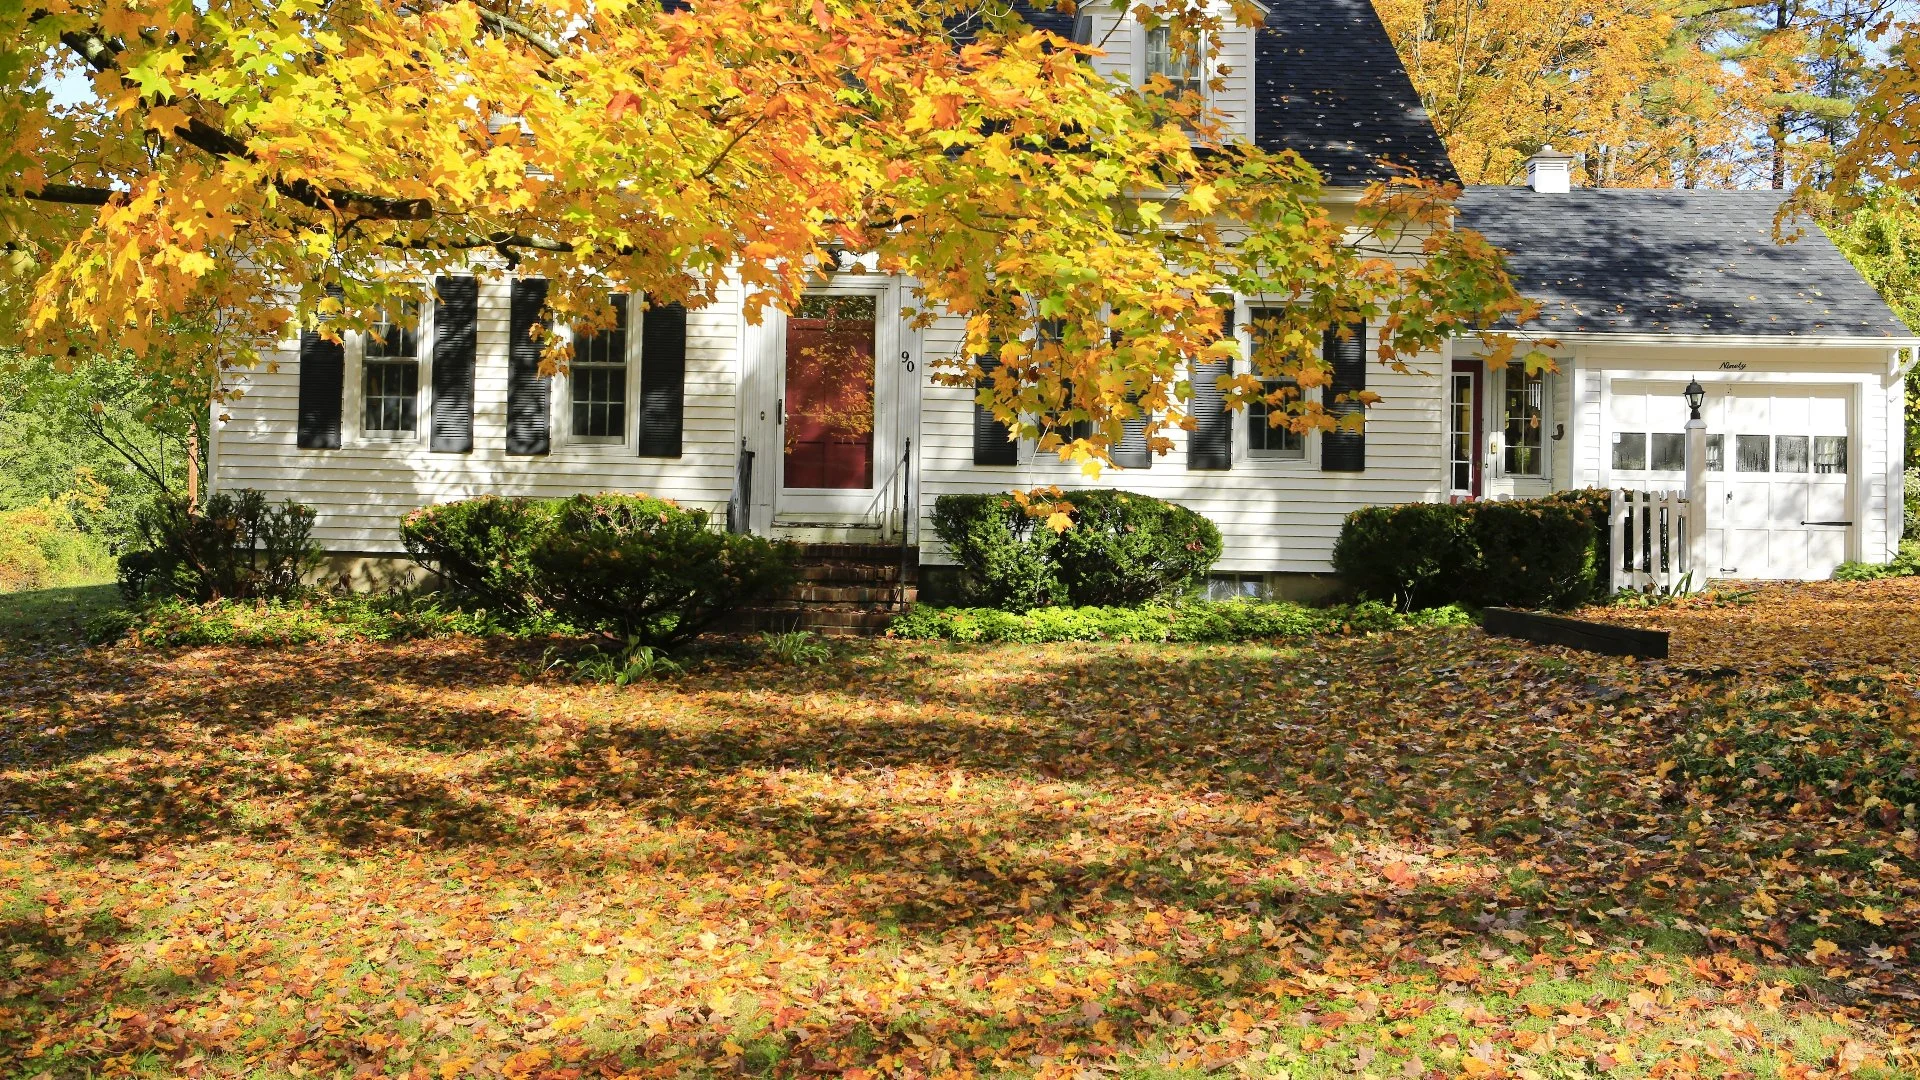 Is It Bad to Remove the Leaves From Your Lawn?